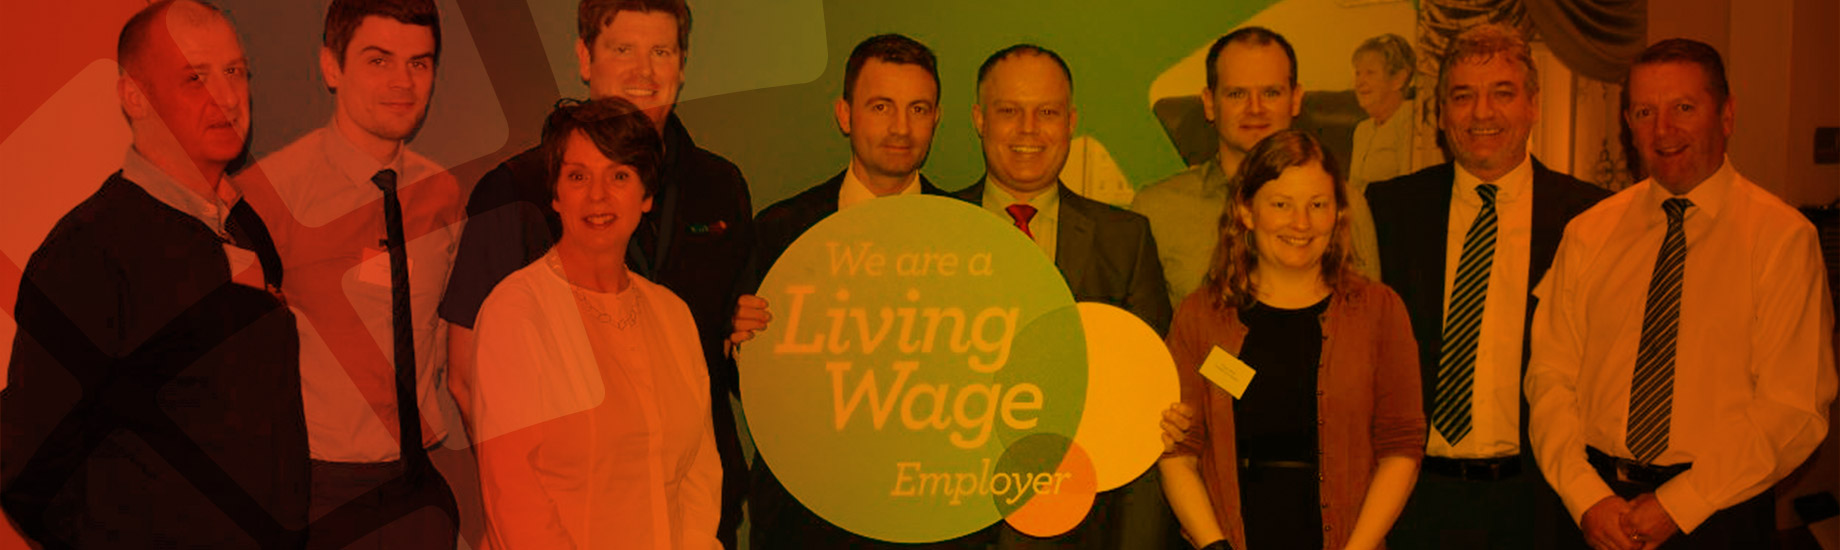 Employees stand with Living Wage sign